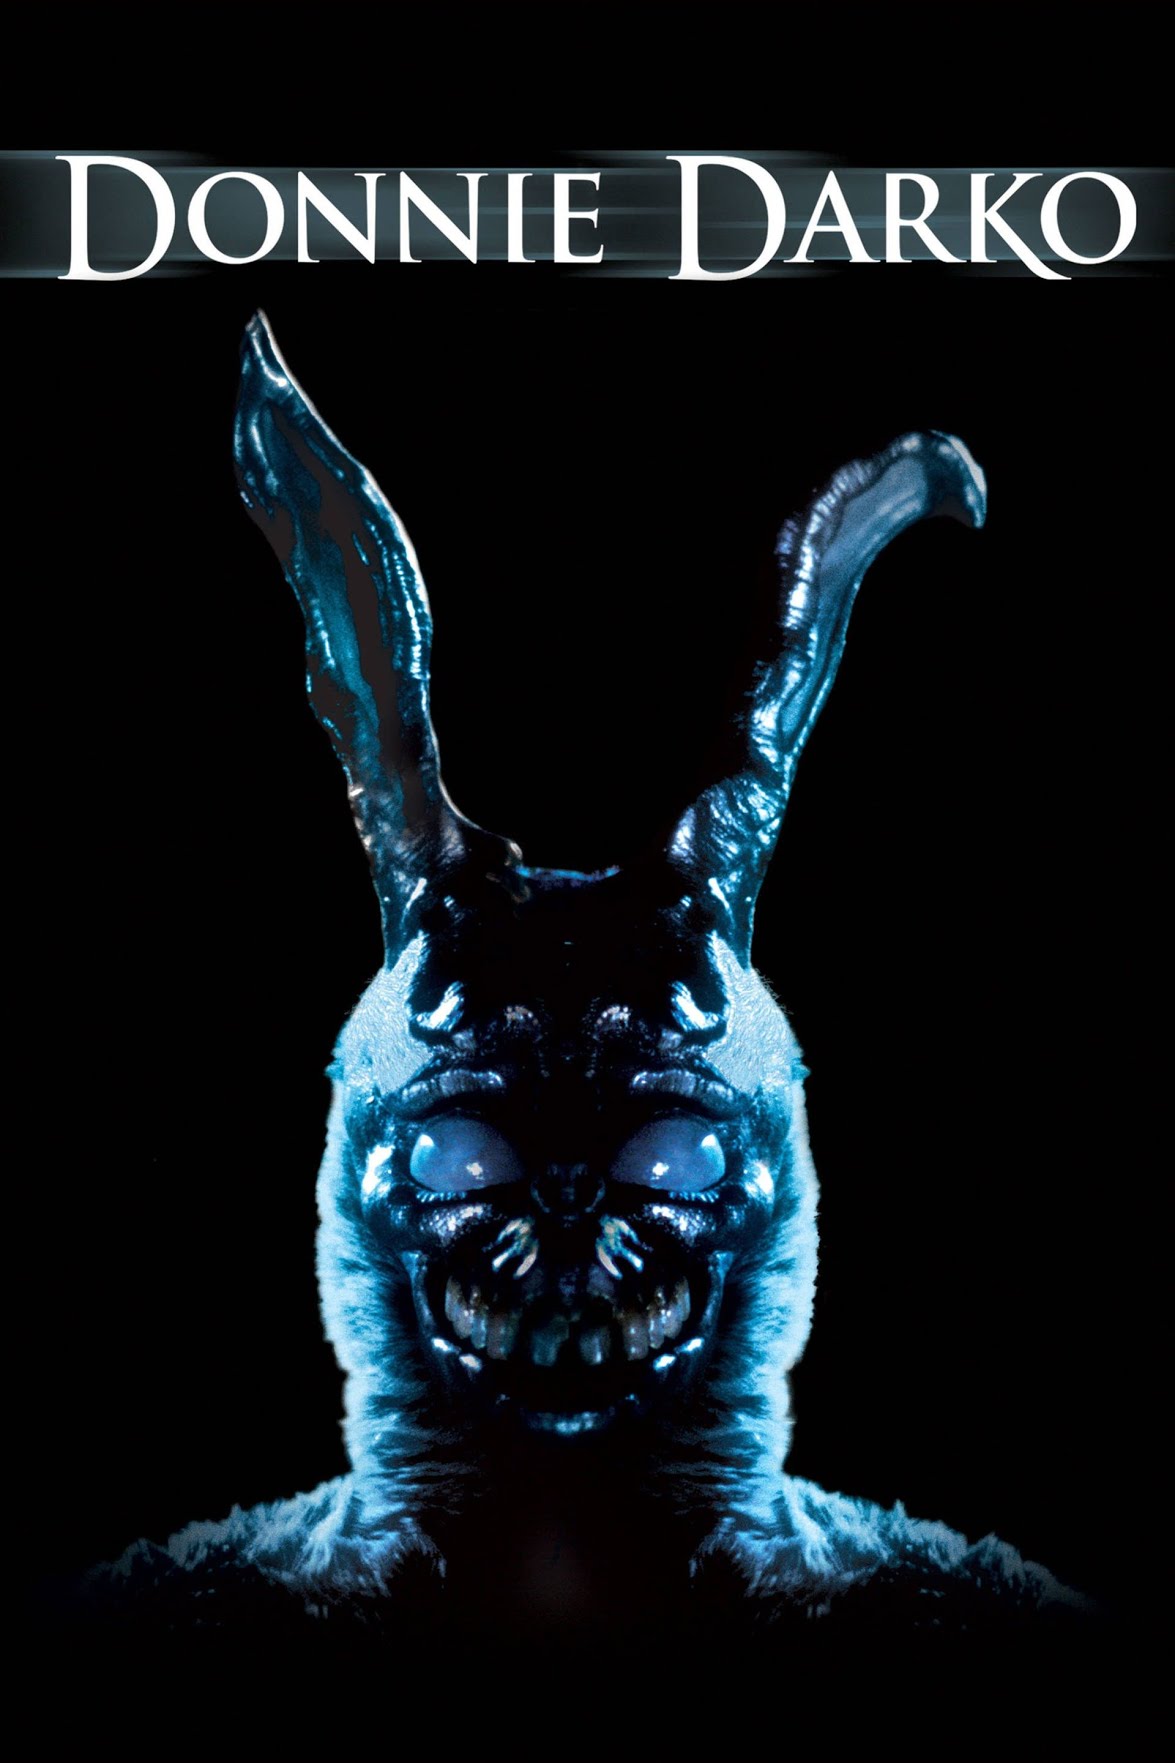 Donnie Darko movie cover with creepy bunny head staring at viewer